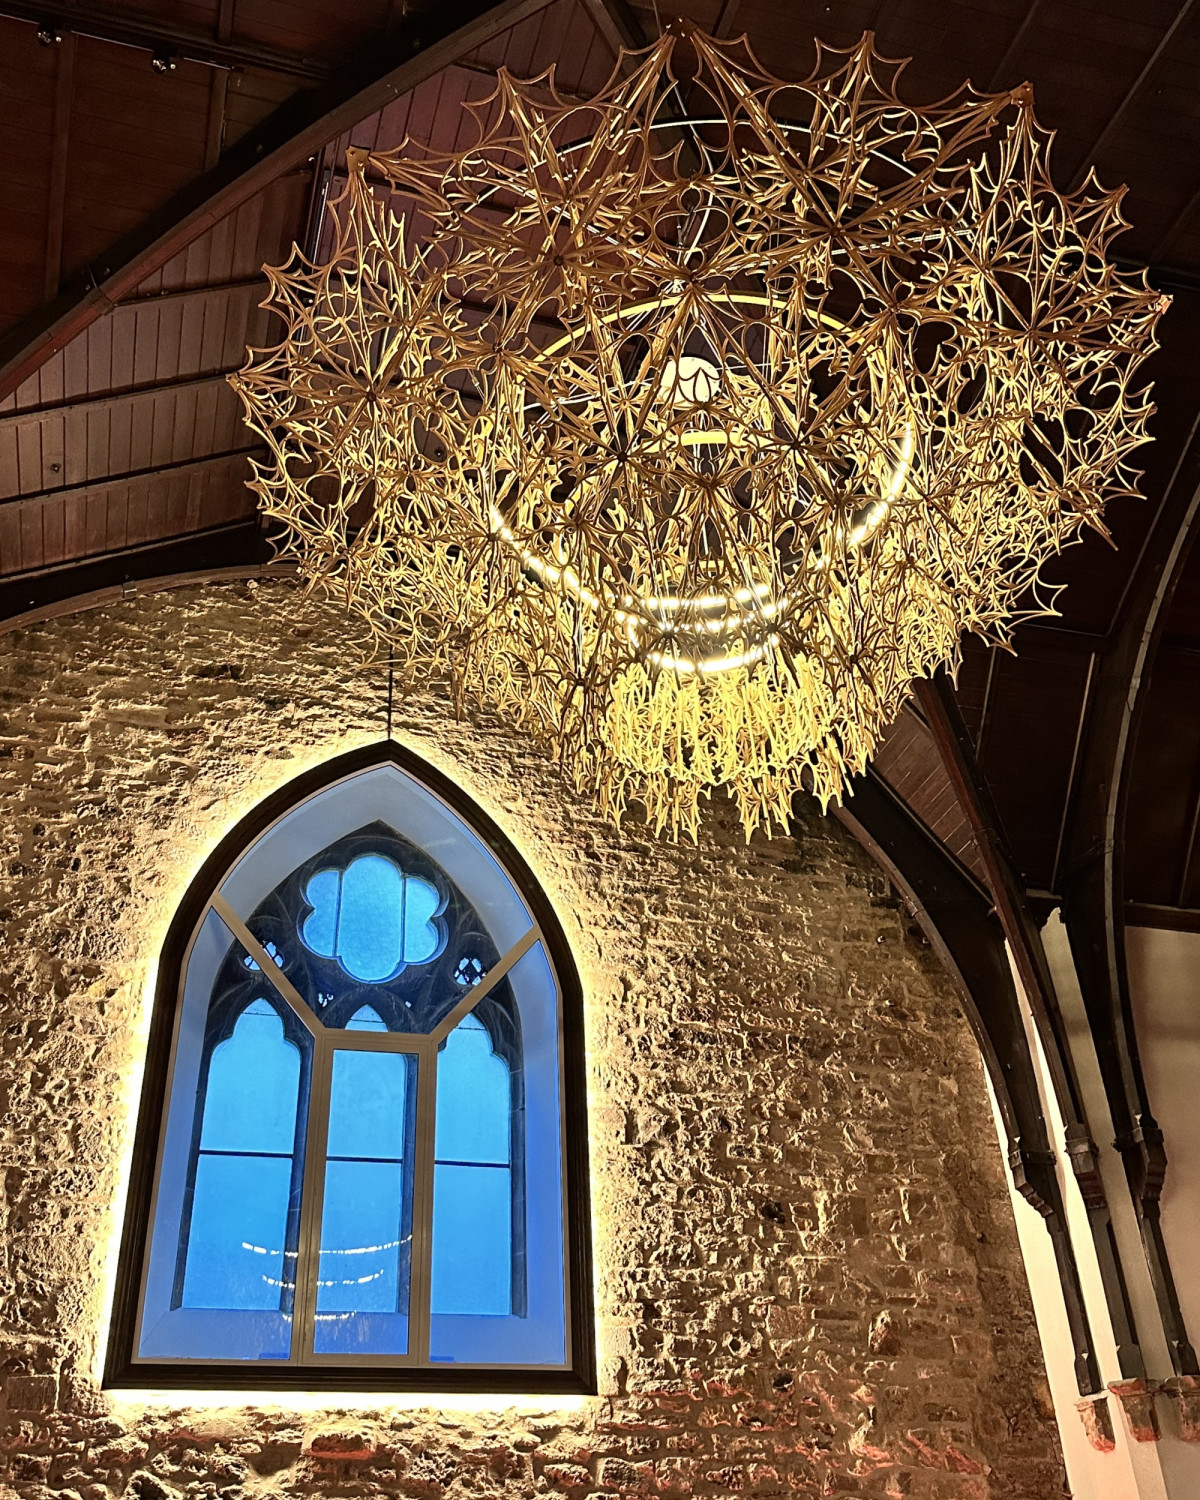 The venue, Chandelier, and a Stained glass window - Siane Chirpich